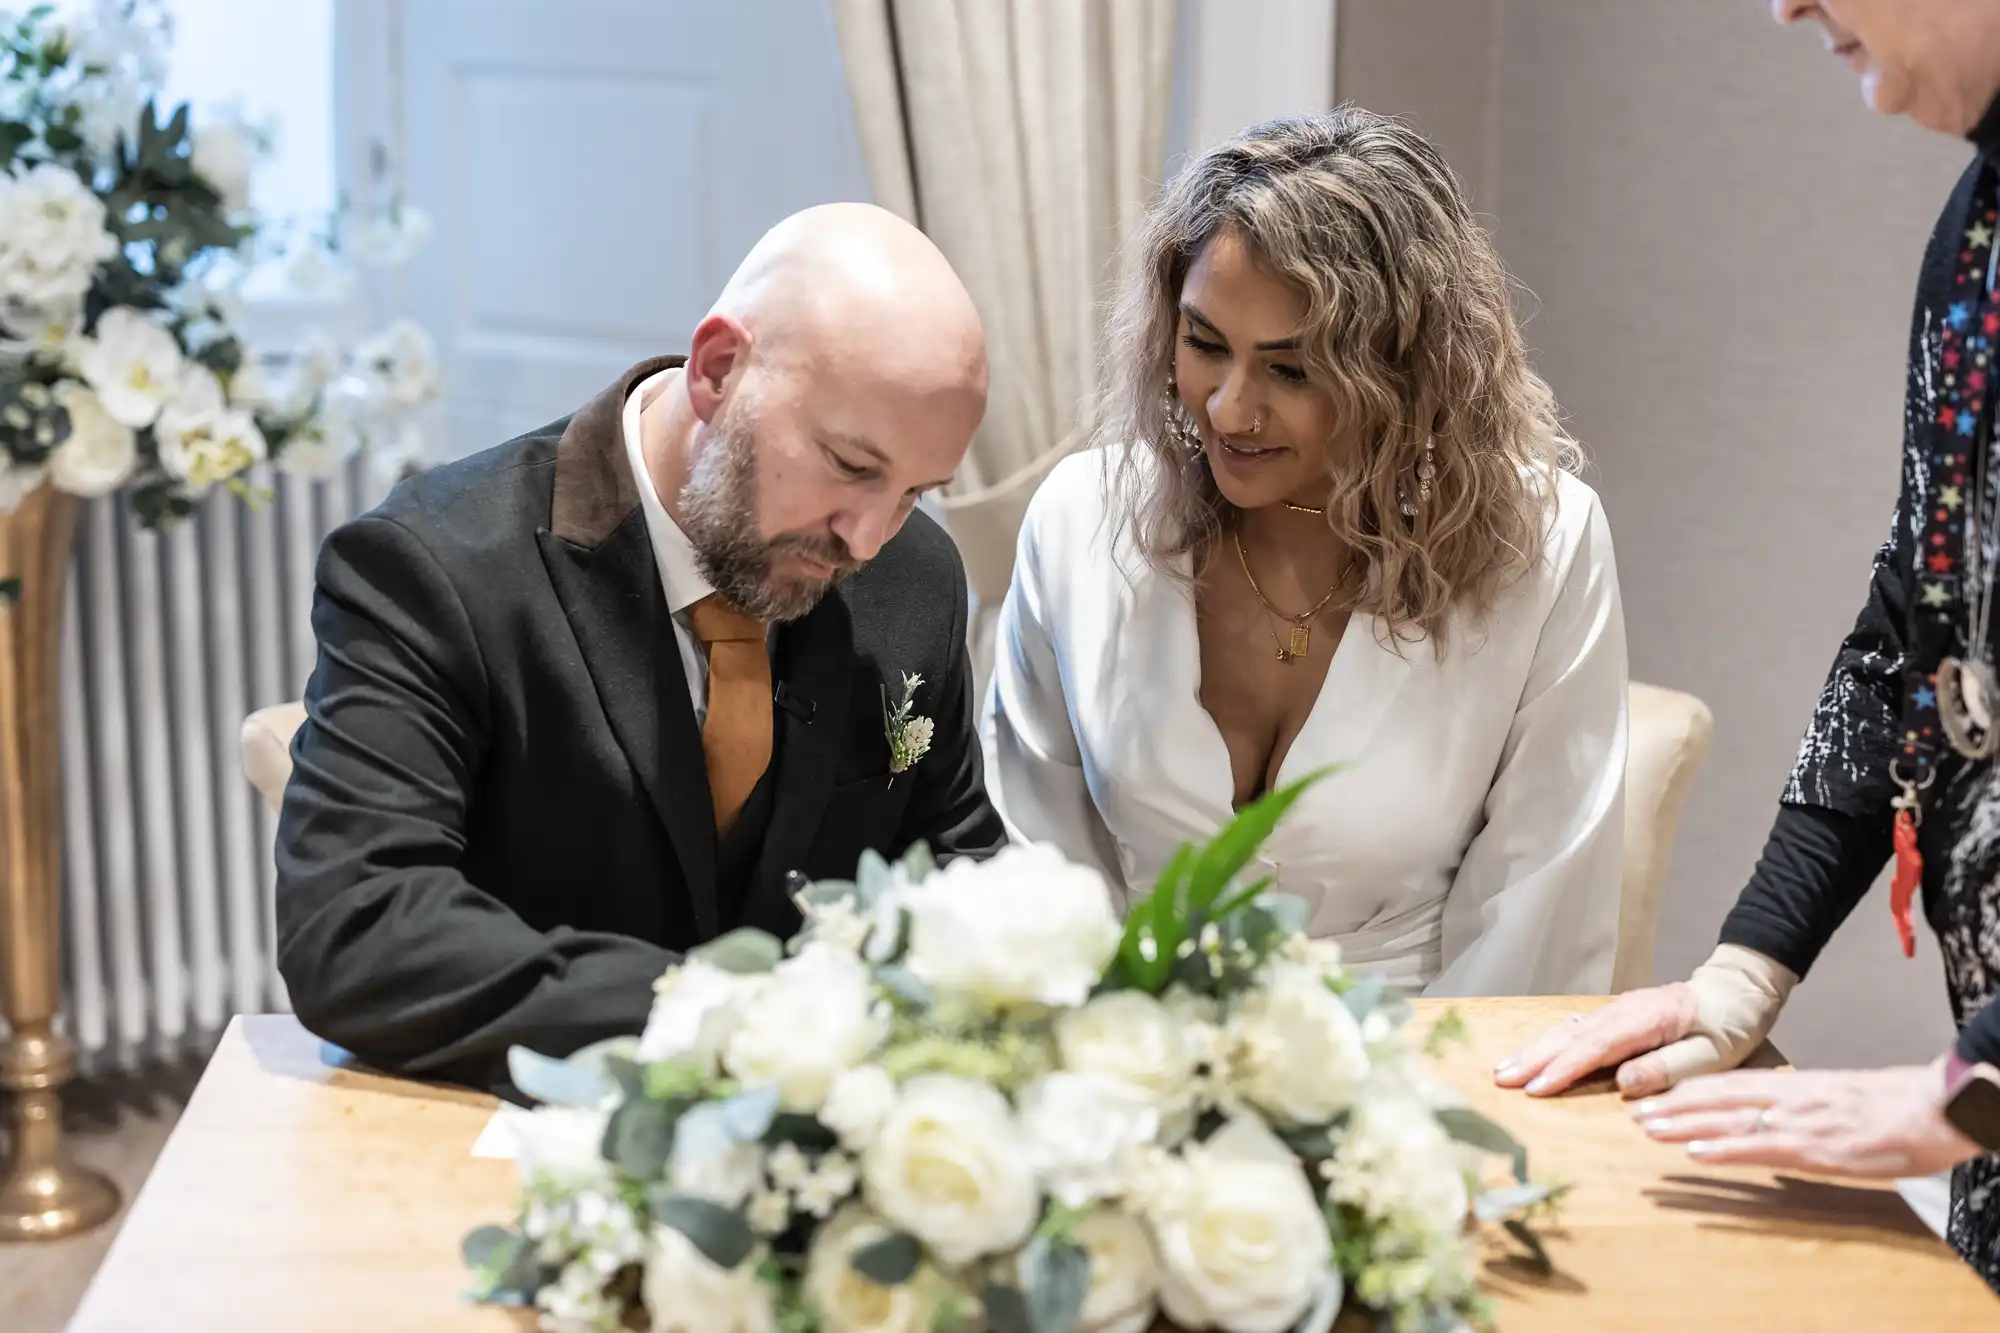 A man and woman are sitting at a table. The man is signing a document while the woman looks on. They are dressed formally, and there is a bouquet of white flowers on the table.